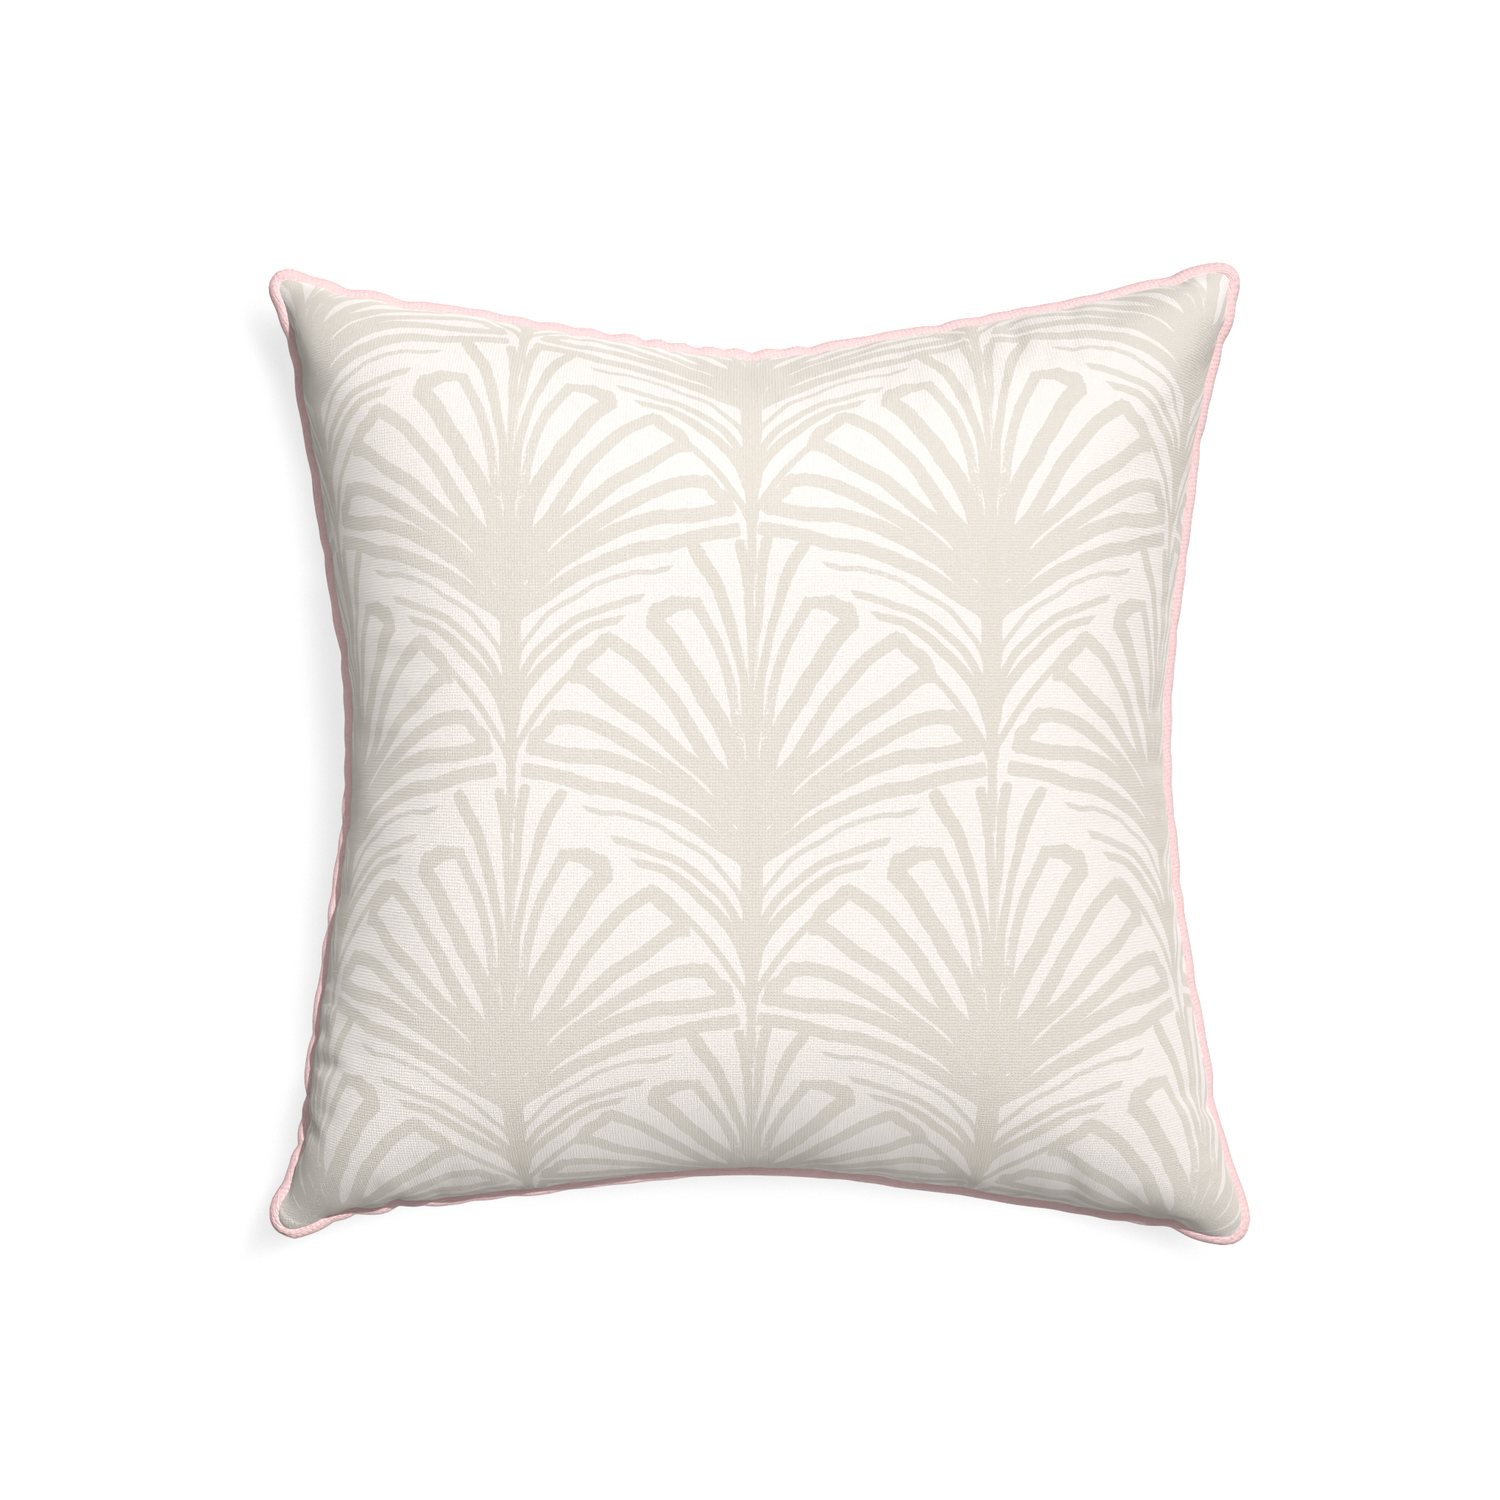 22-square suzy sand custom pillow with petal piping on white background